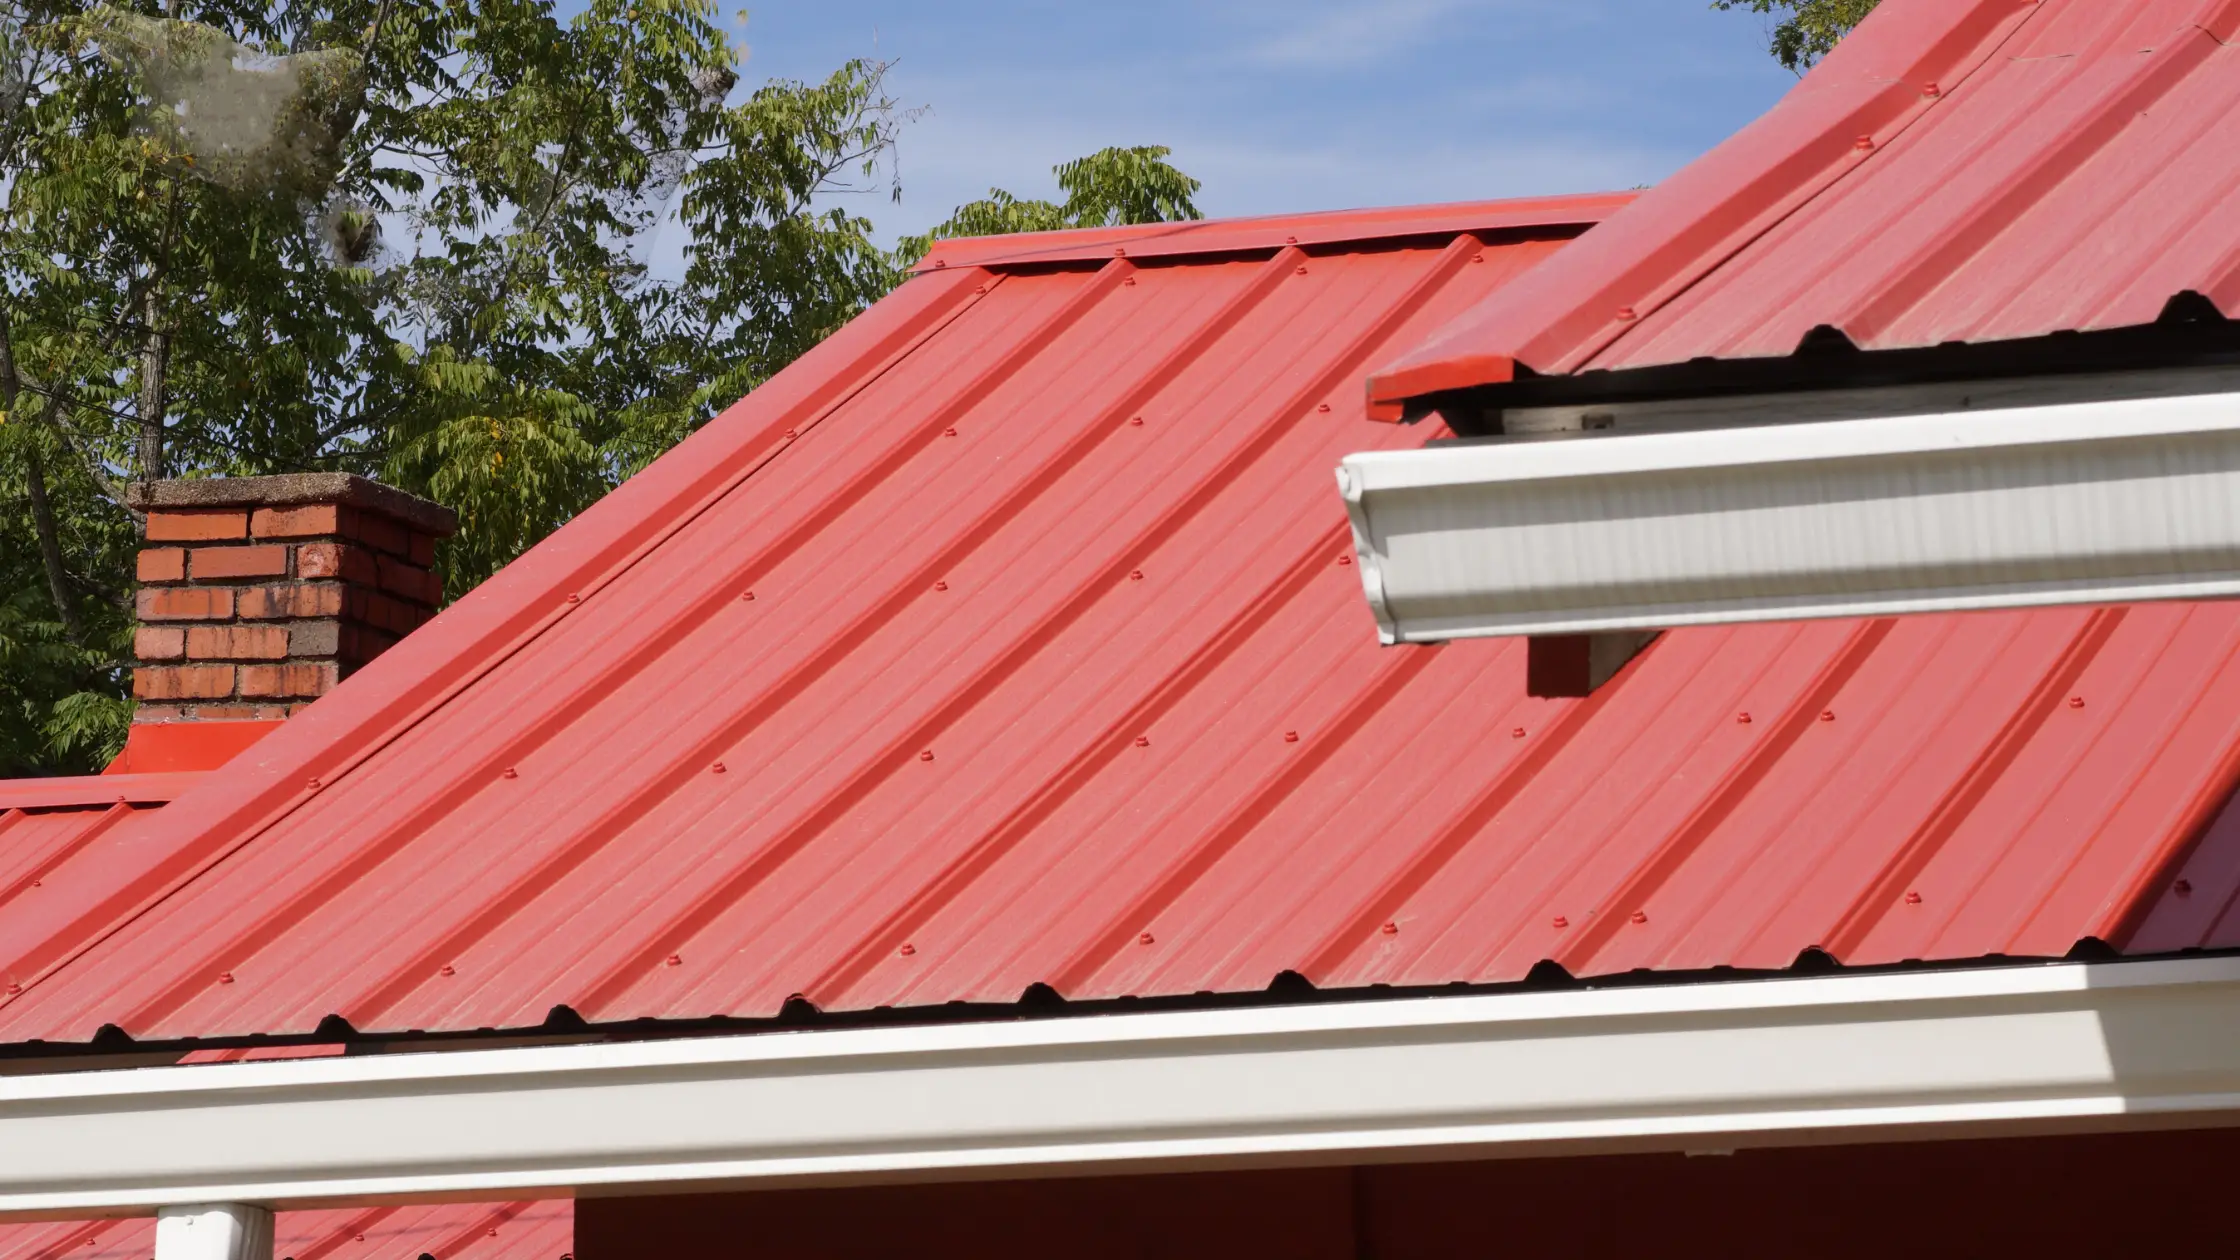 Installing Flashing: A Simple Guide To Installing Metal Roof Flashing